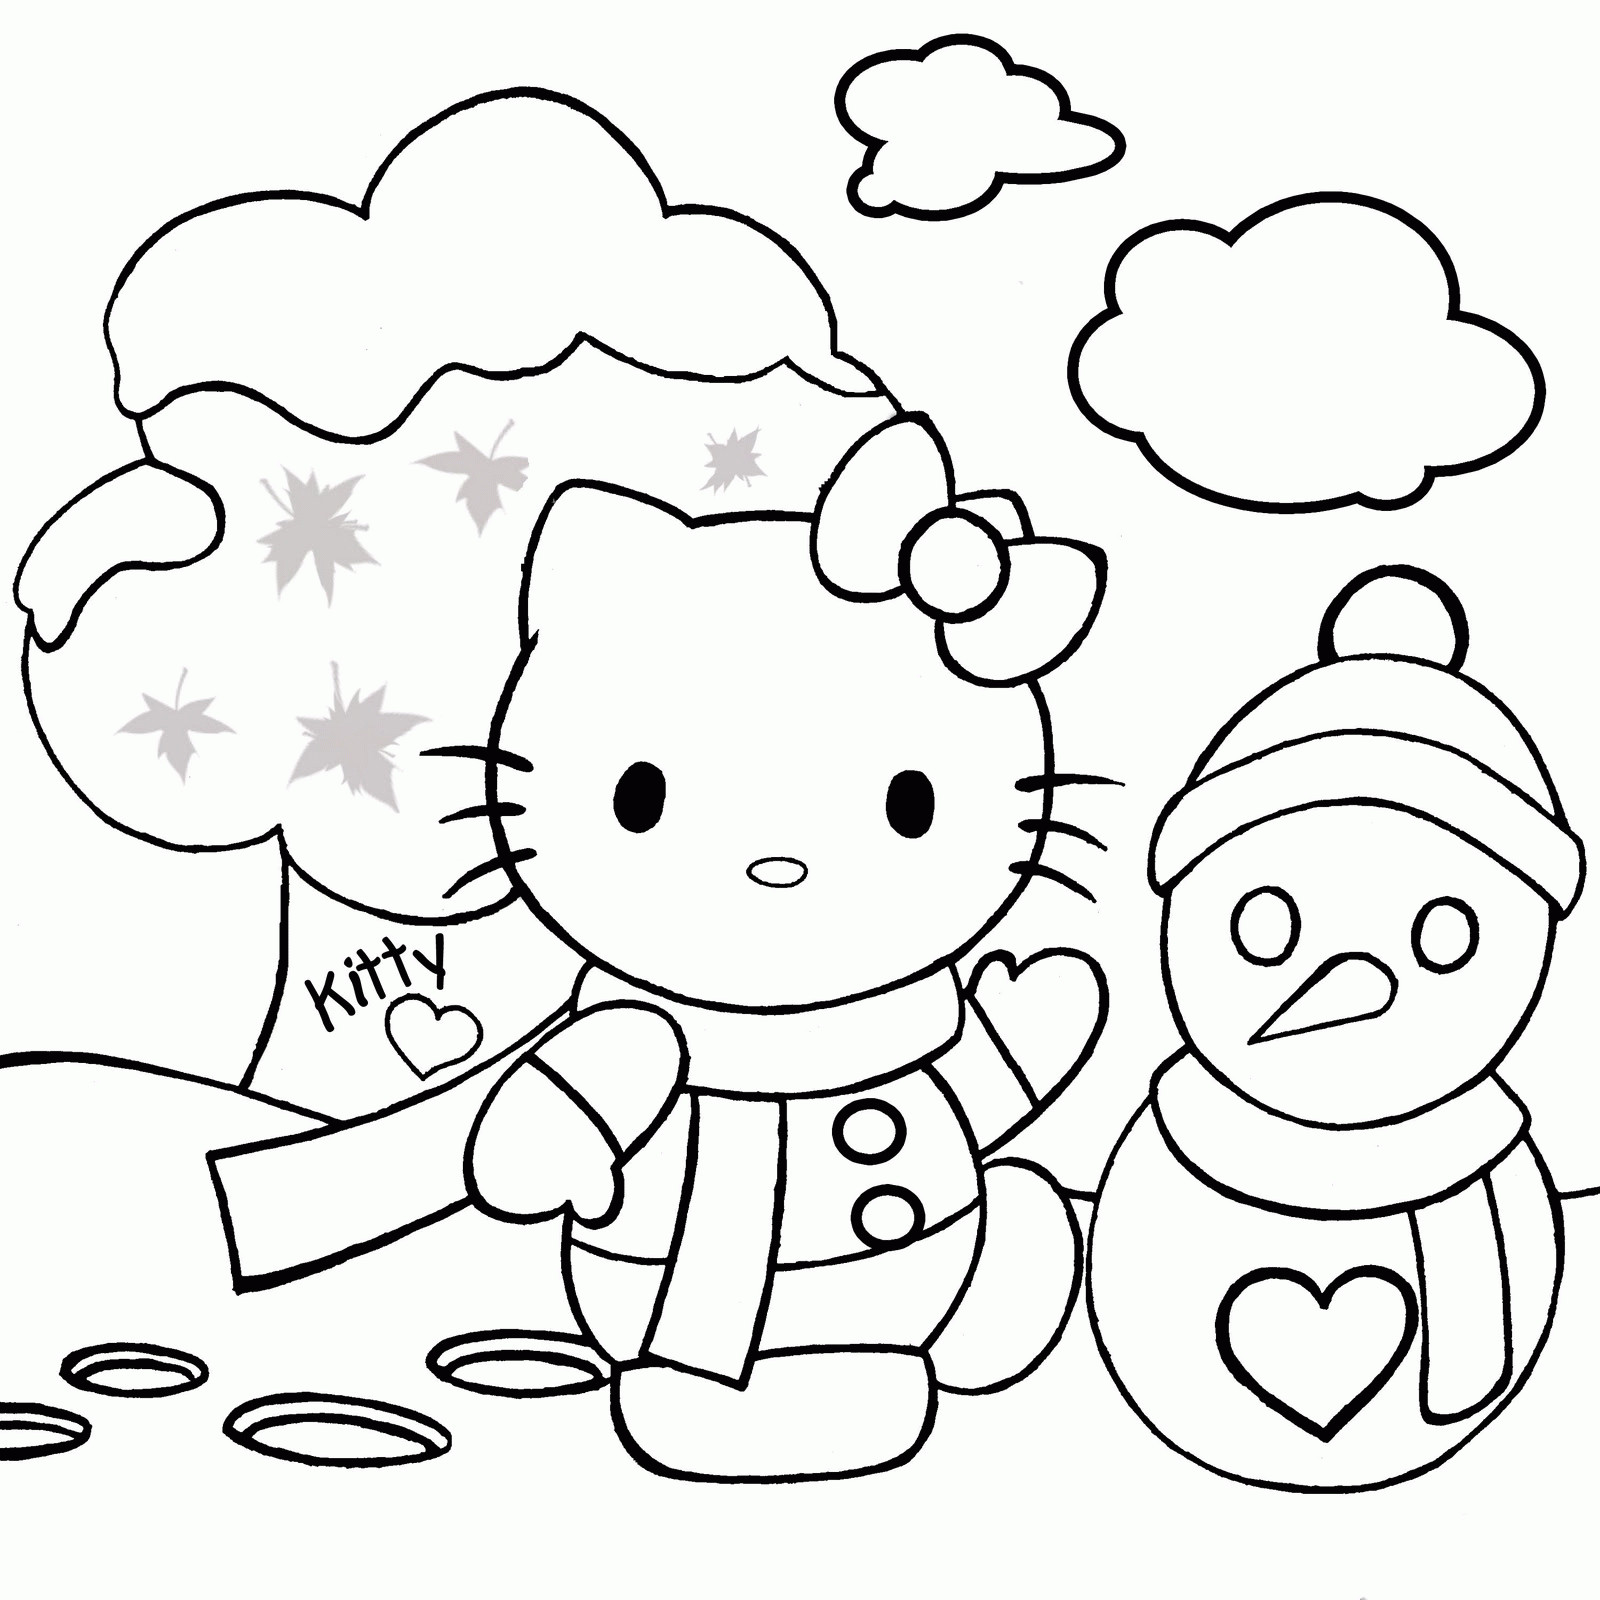 Girls Christmas Coloring Pages
 Christmas Coloring Pages For Girls Coloring Home